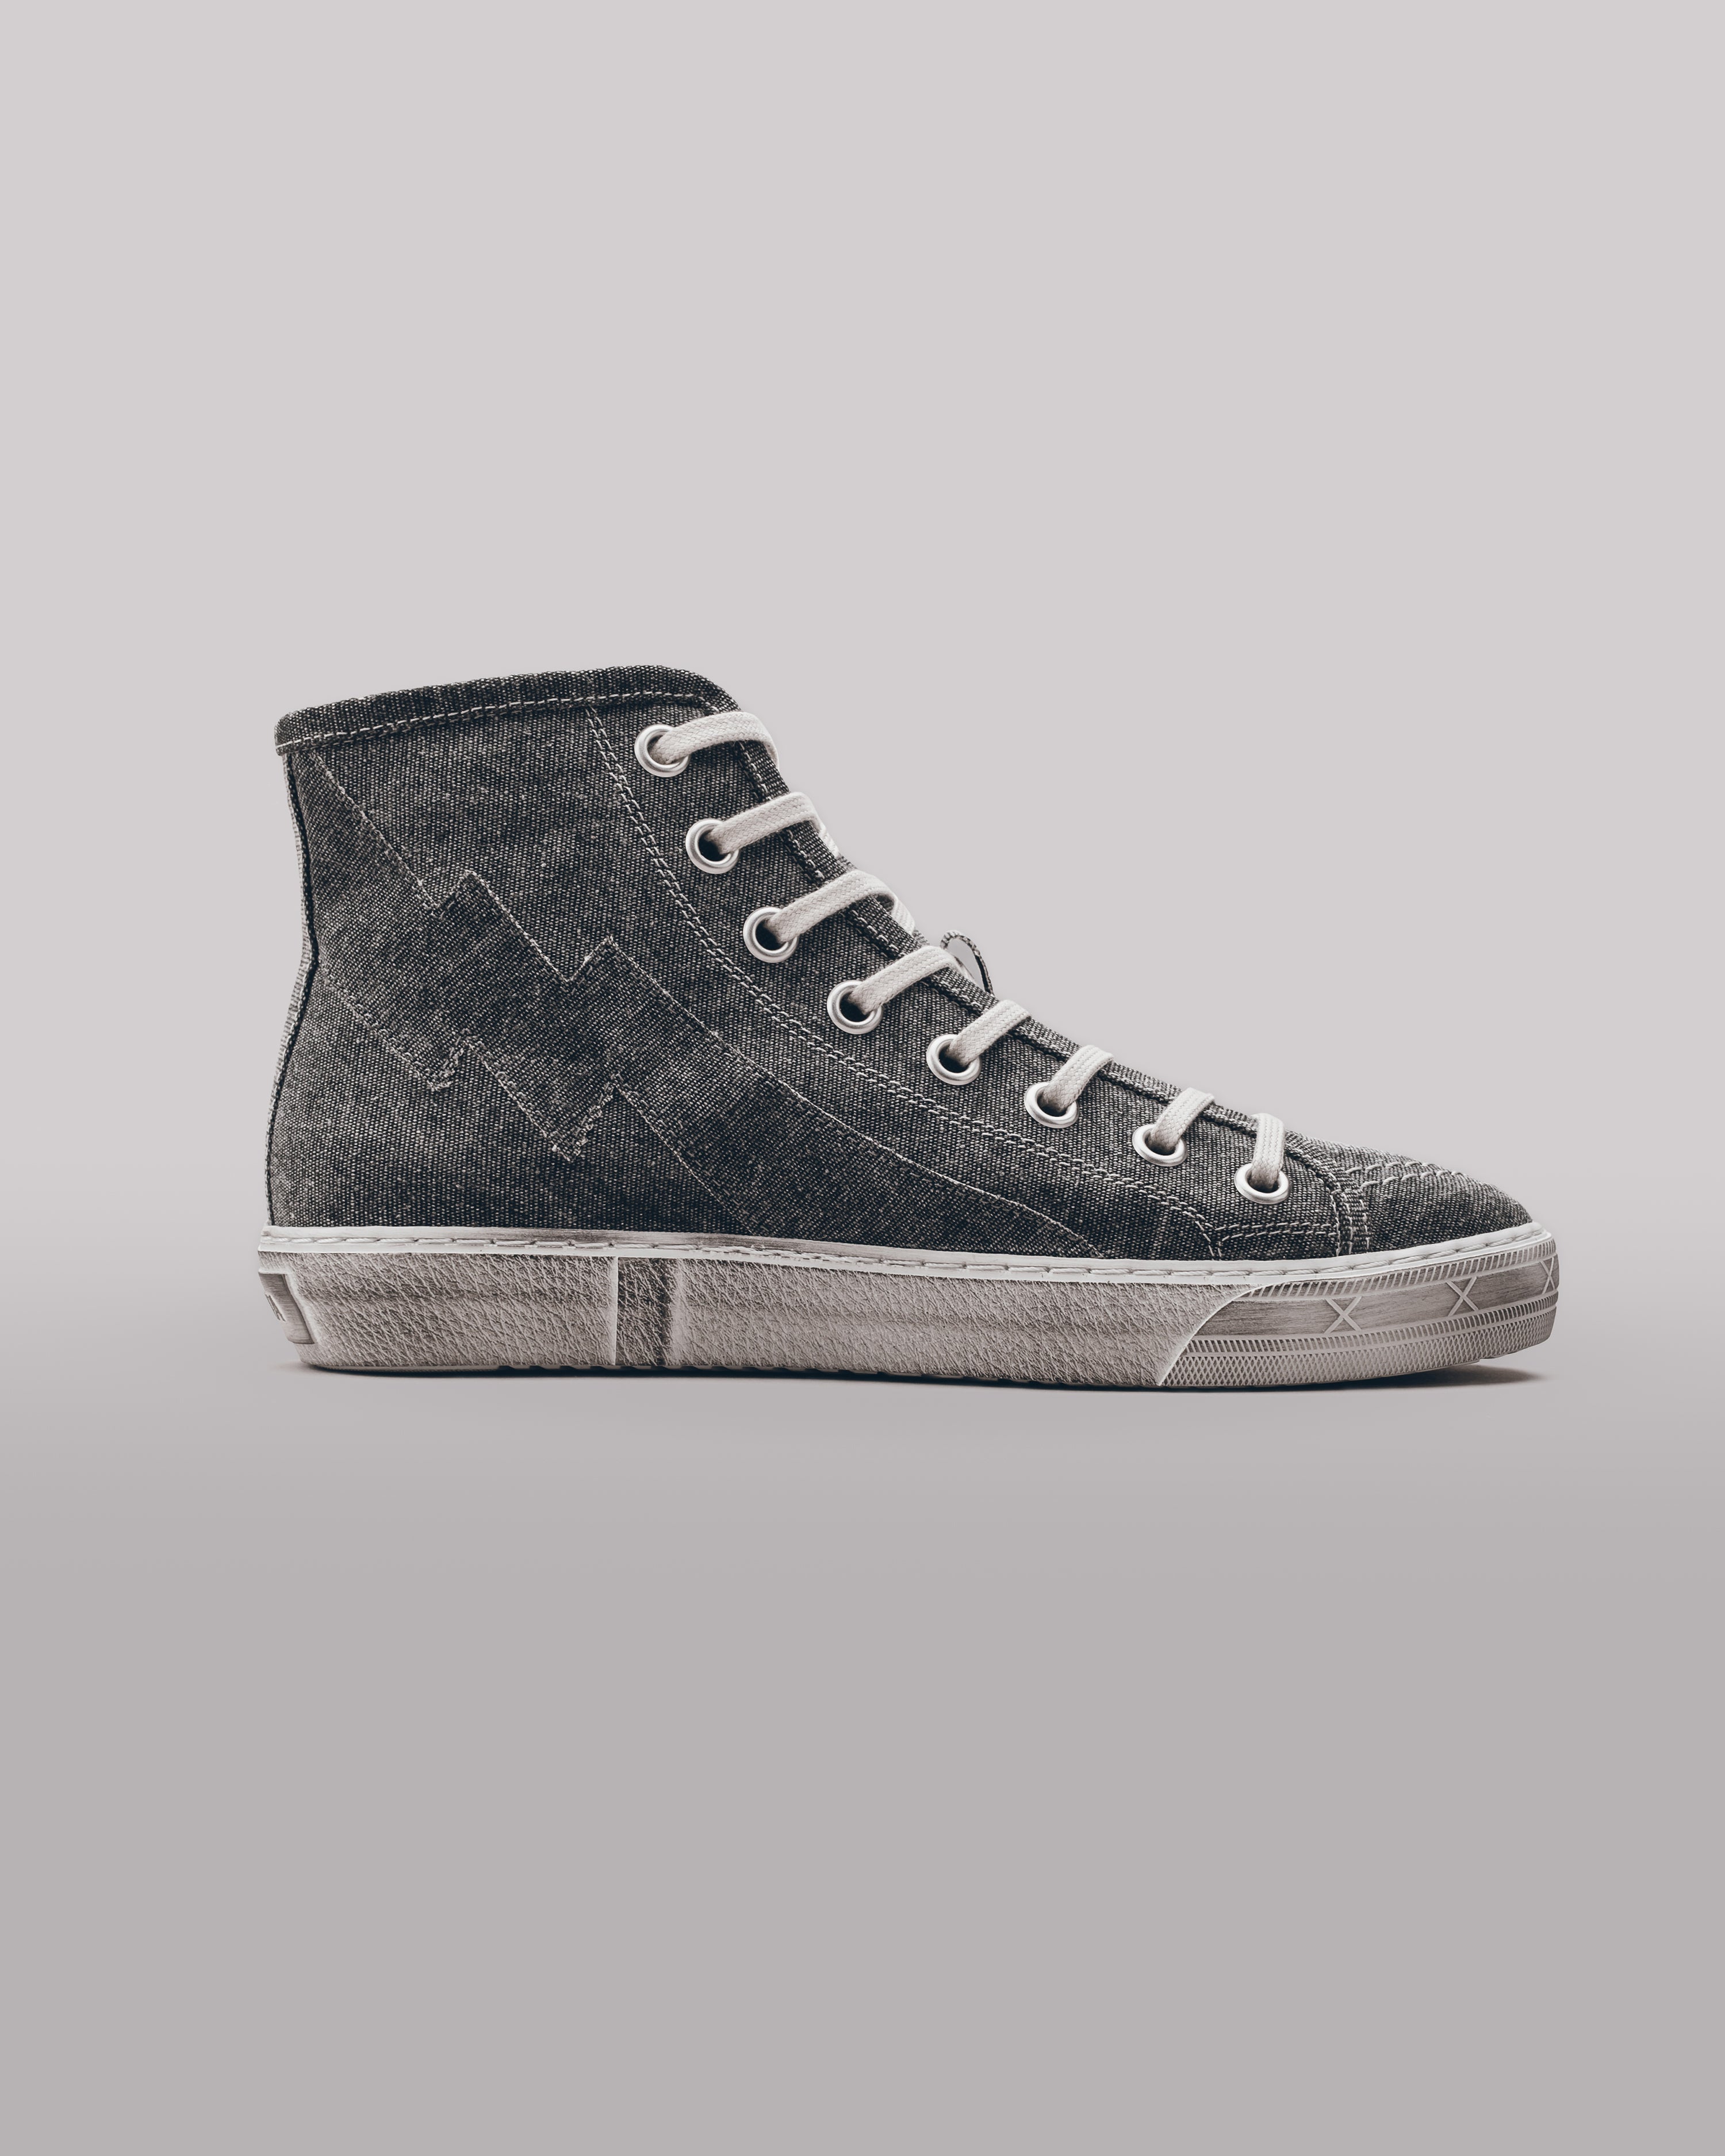 The Dark Canvas Sneakers